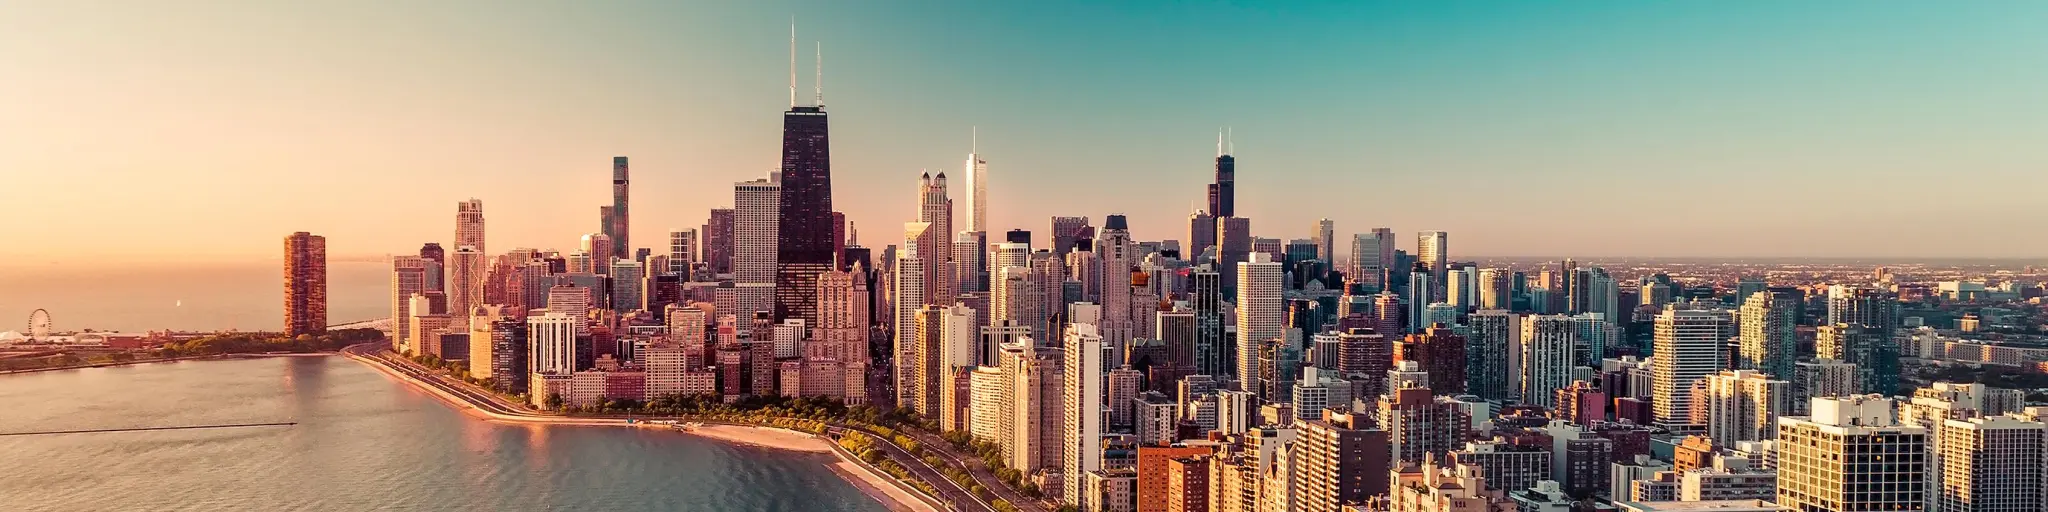 Chicago's skyline during sunrise, on the shore of Lake Michigan